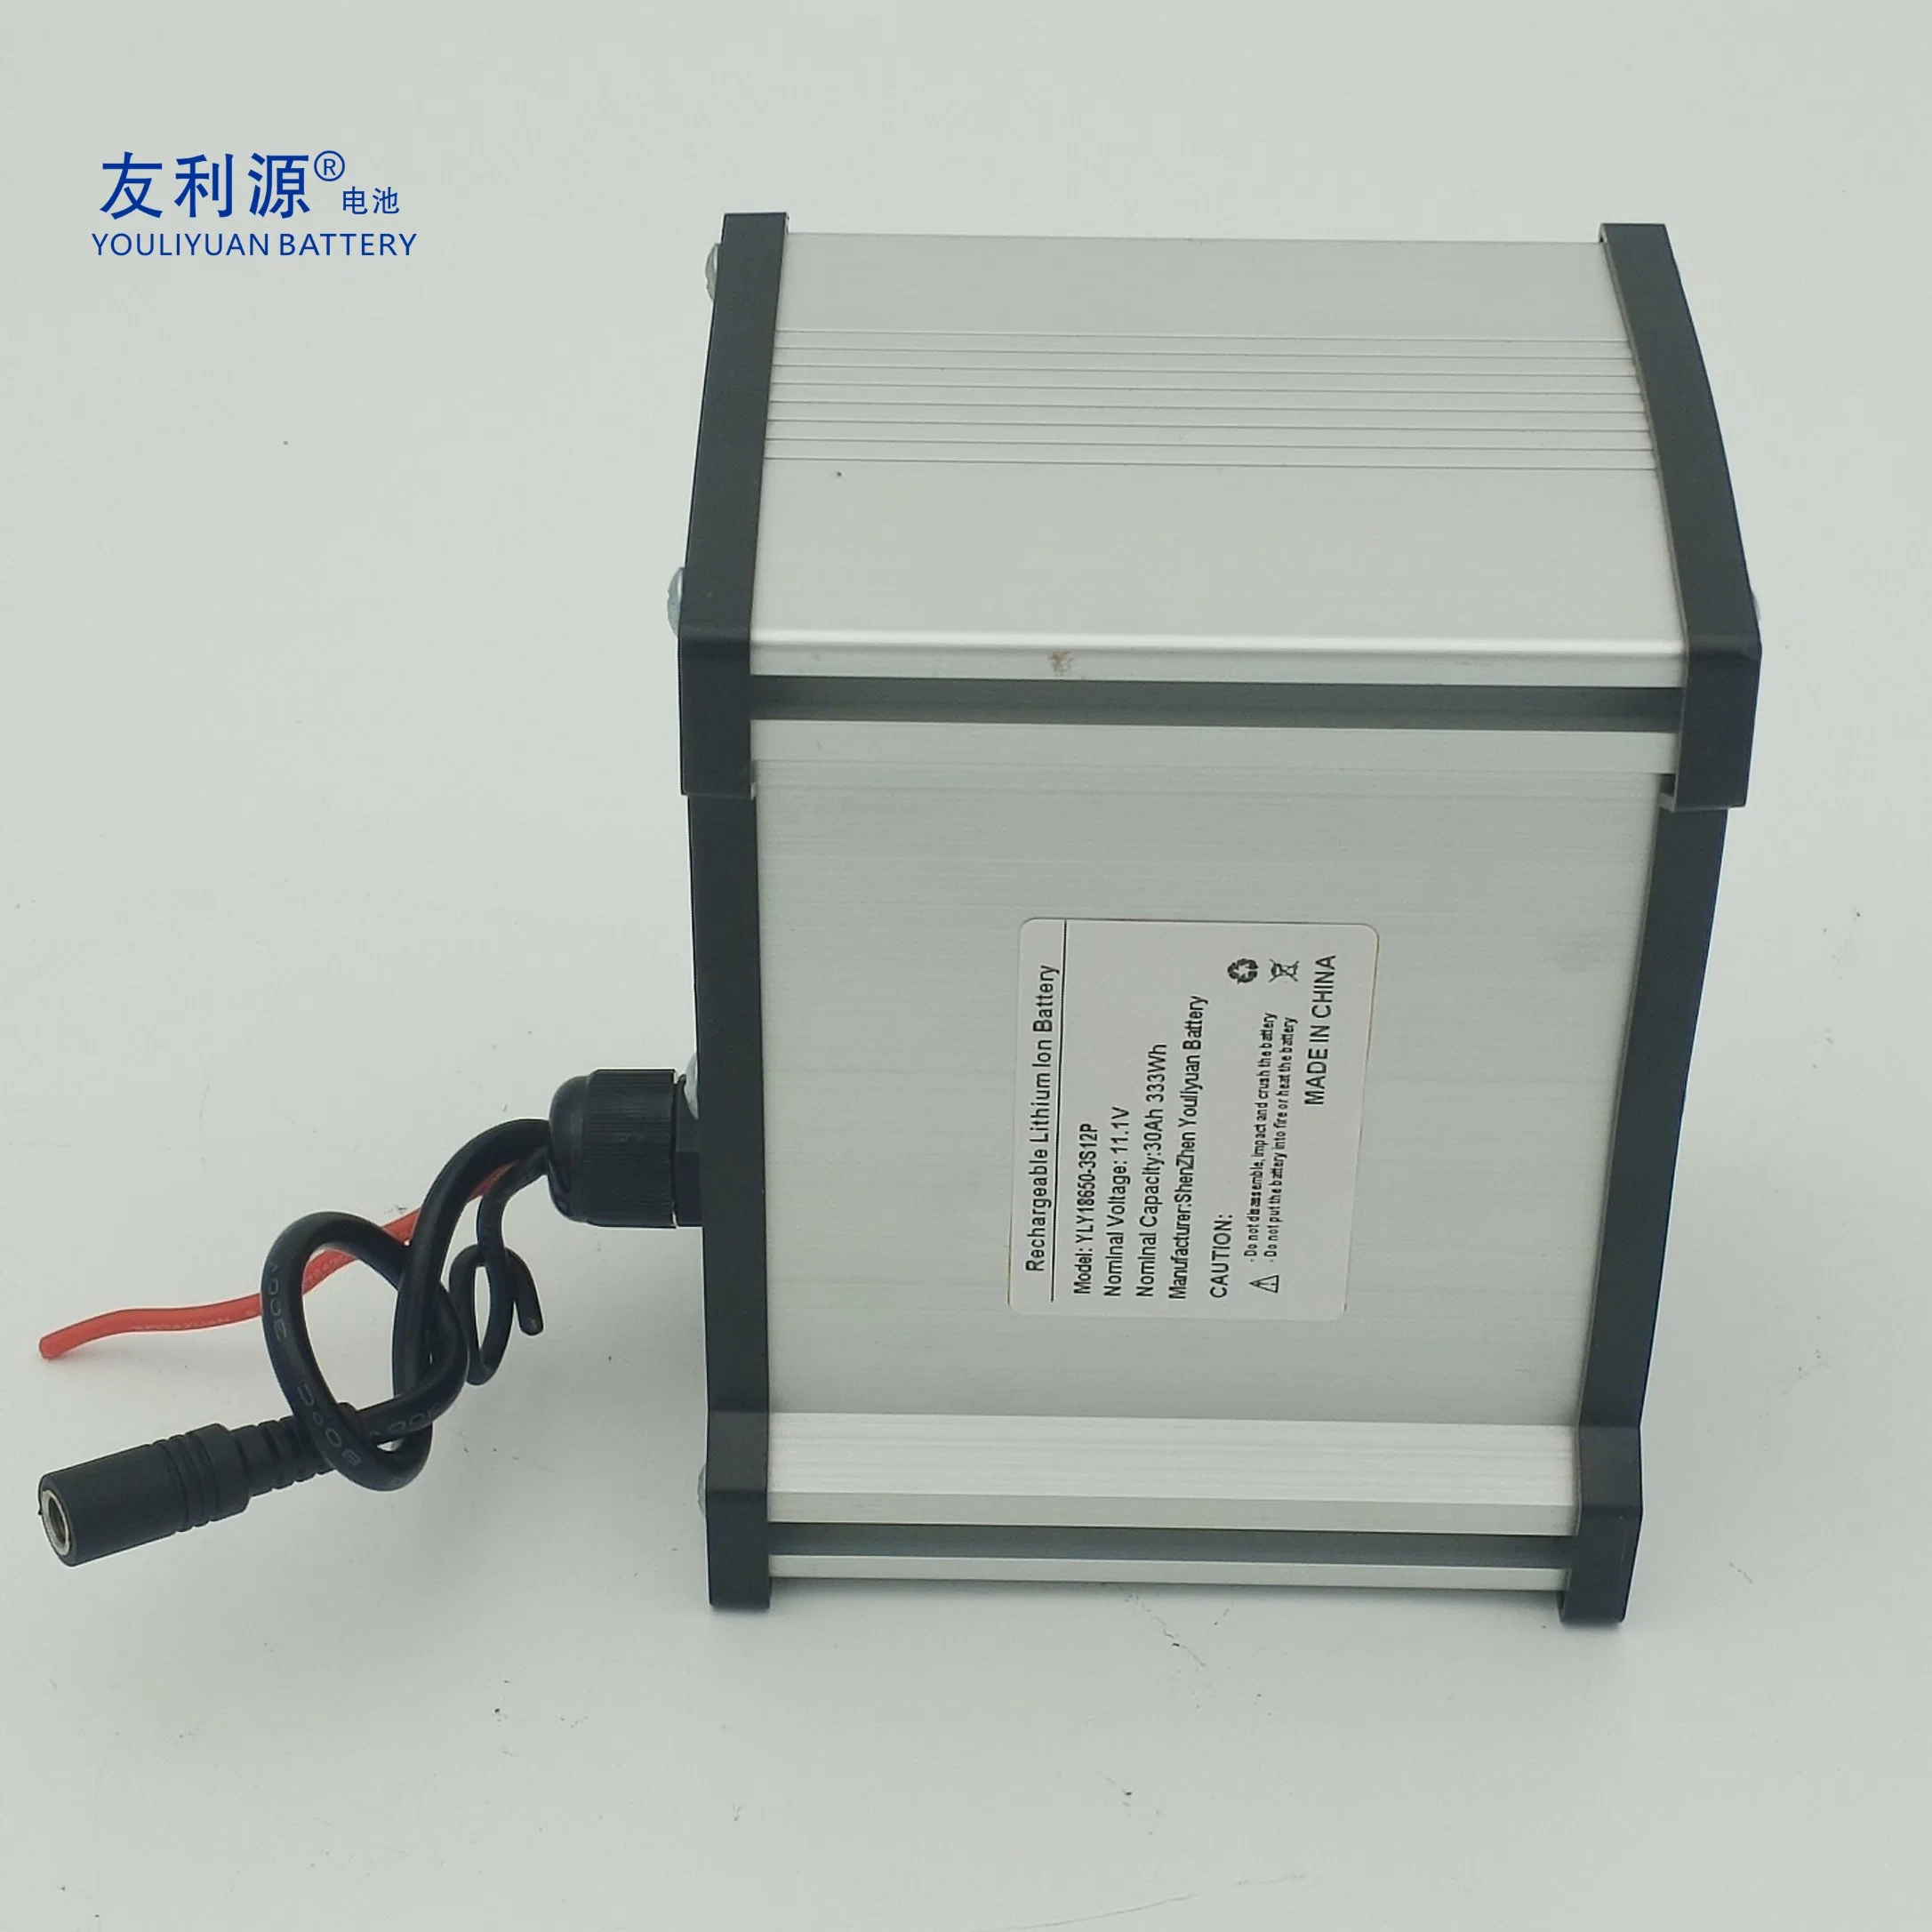 3s12p 18650 Battery 12V Lithium Battery High Capacity Energy Storage Li-ion Battery 30ah 333wh with Aluminum Housing for Smart Bench /Light